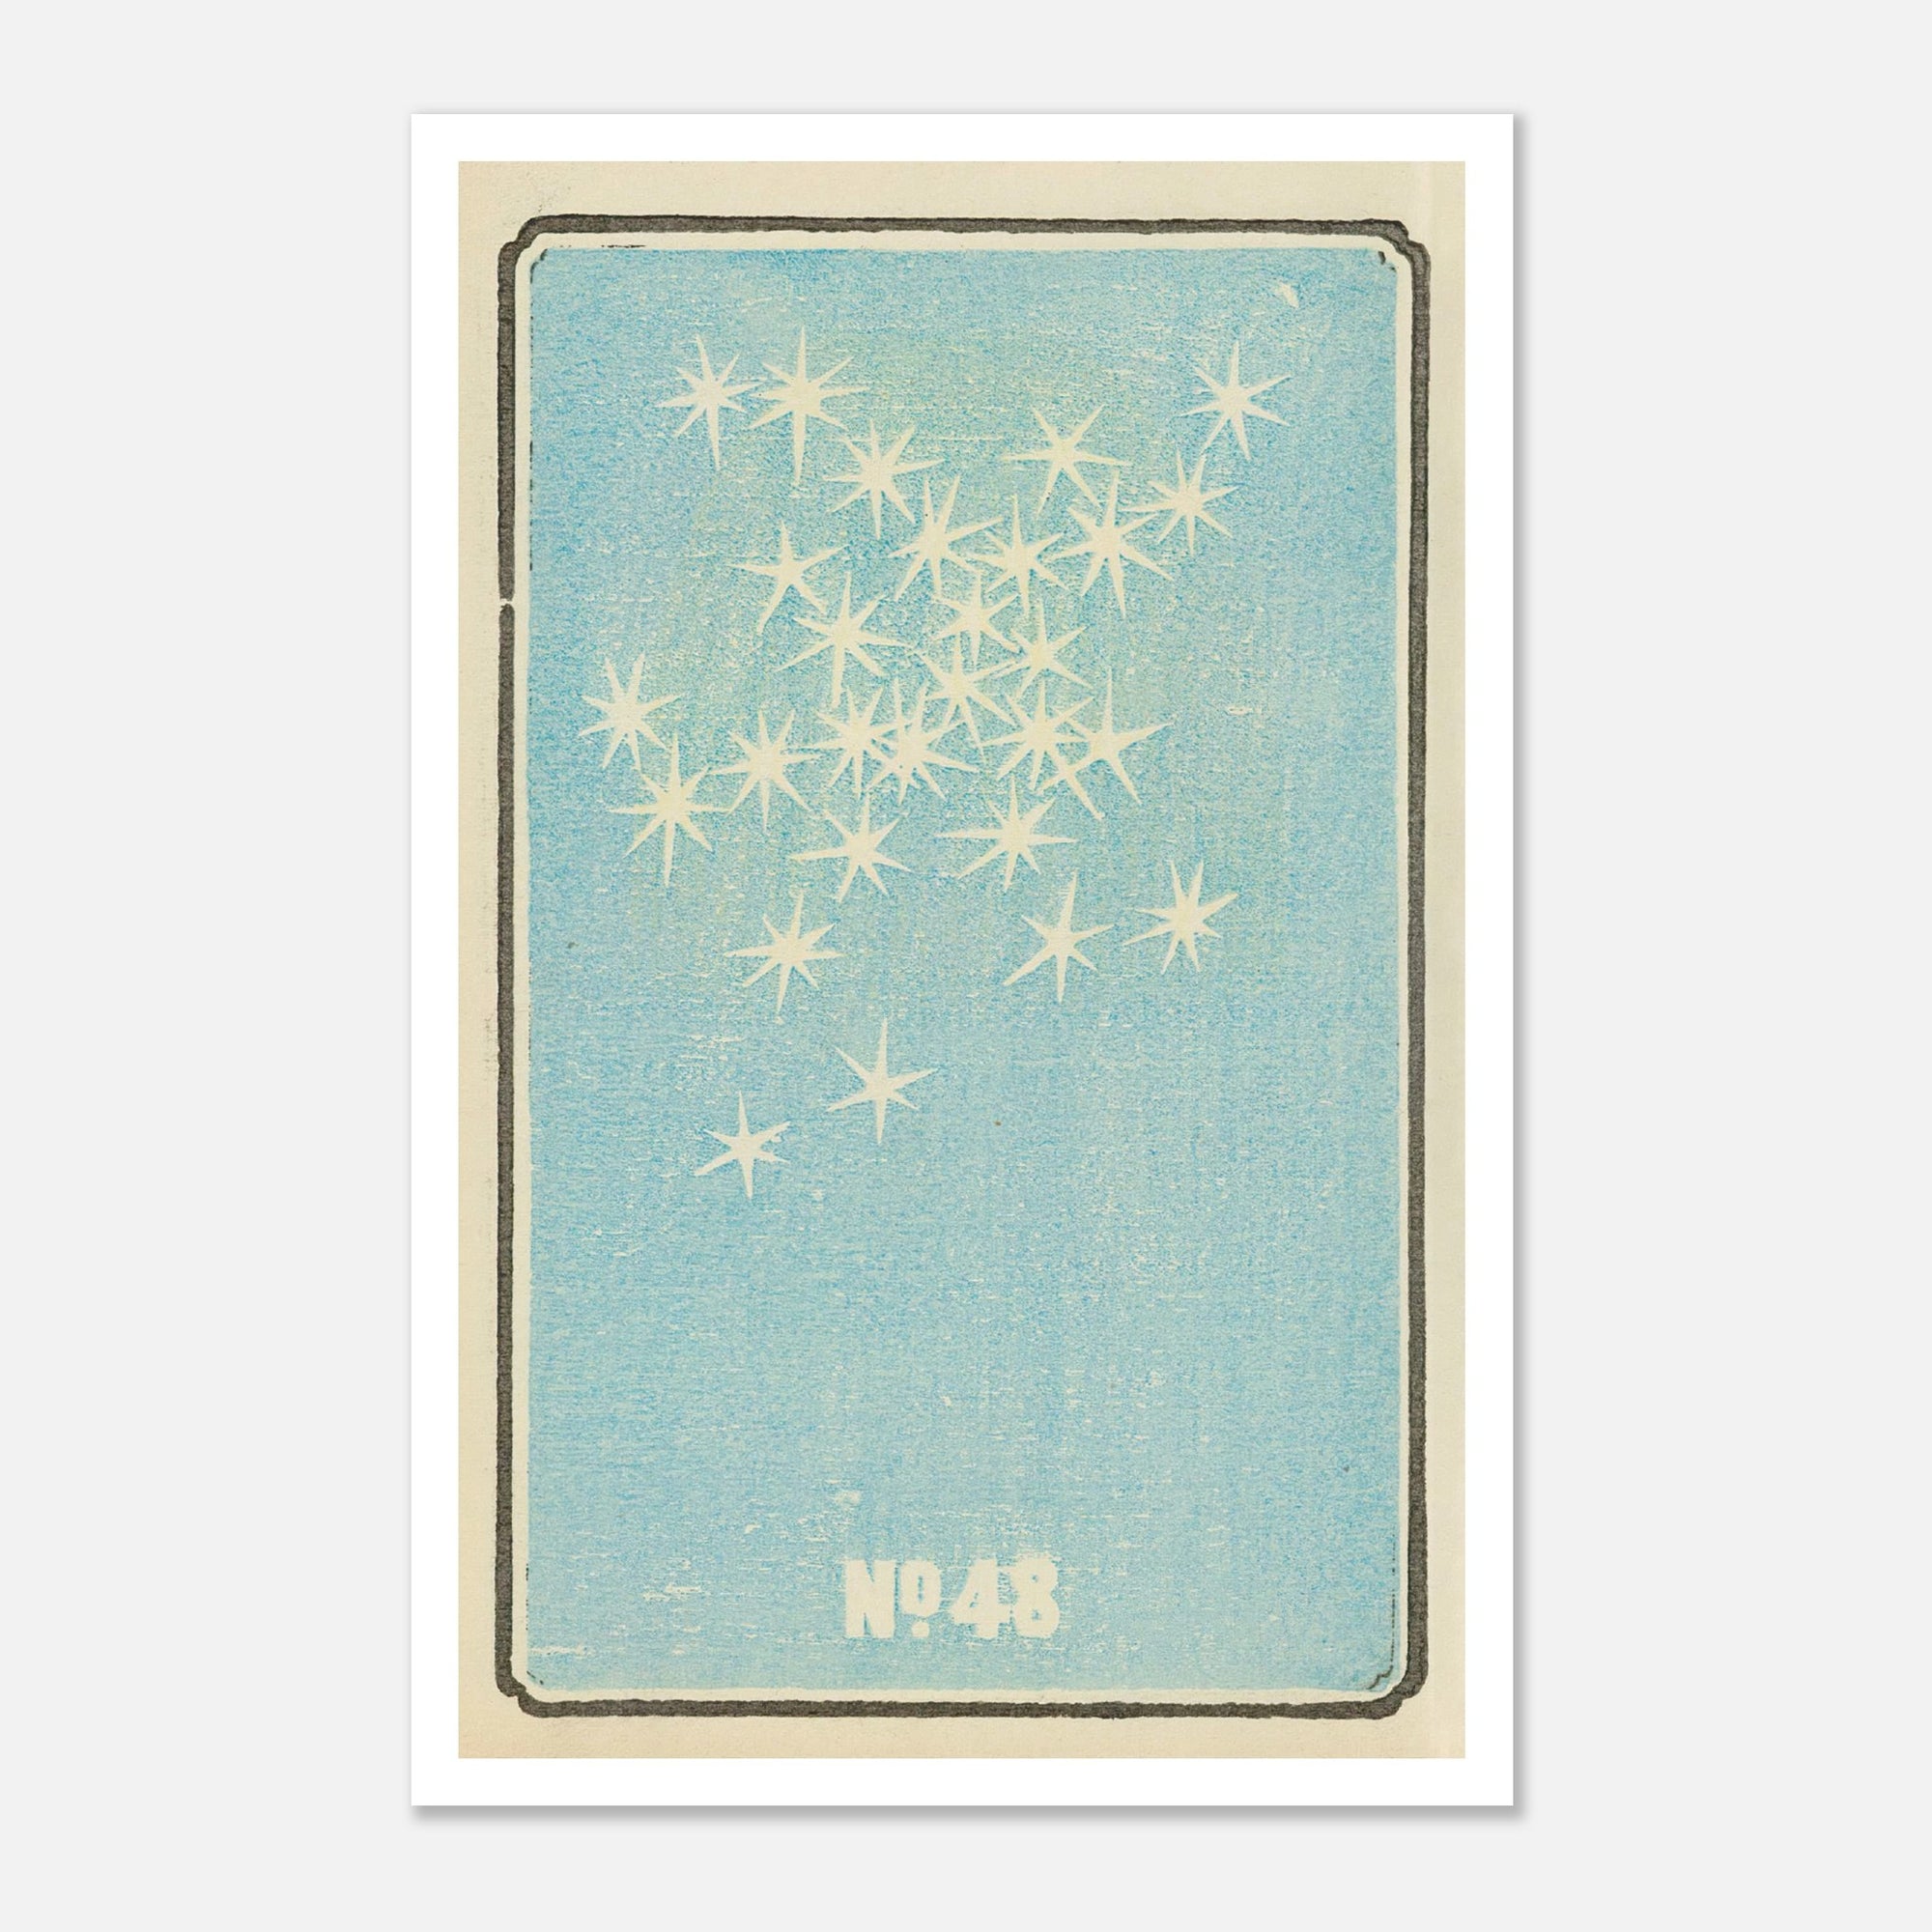 pale blue and white art poster of fireworks